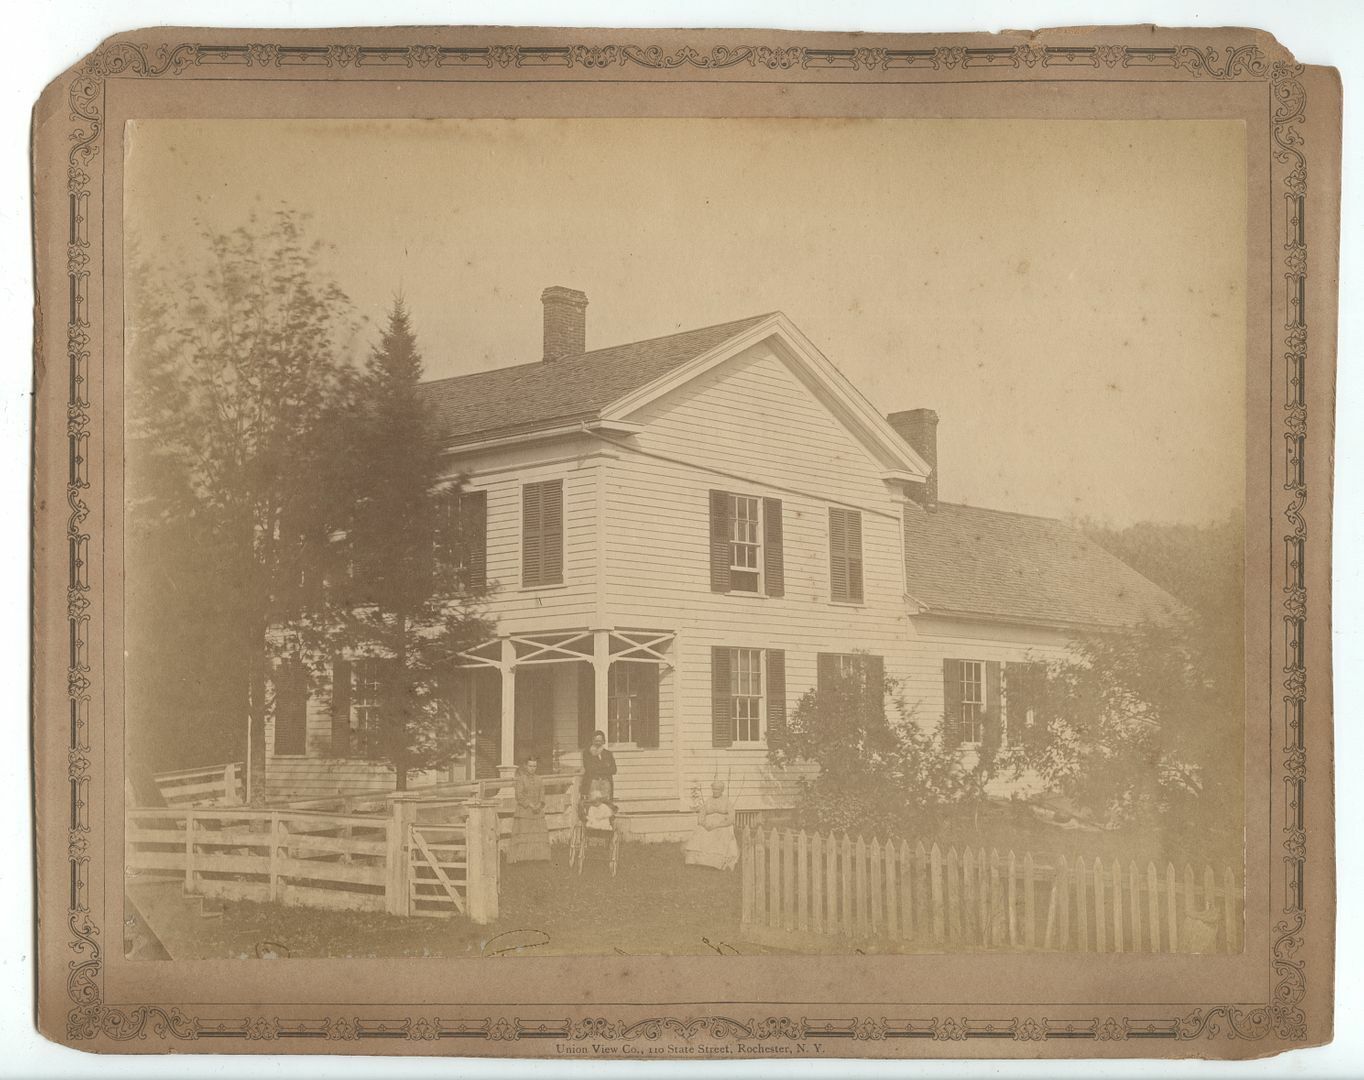 c1880 Albumen Print Rural Family in front of Home, Union View Company, Rochester